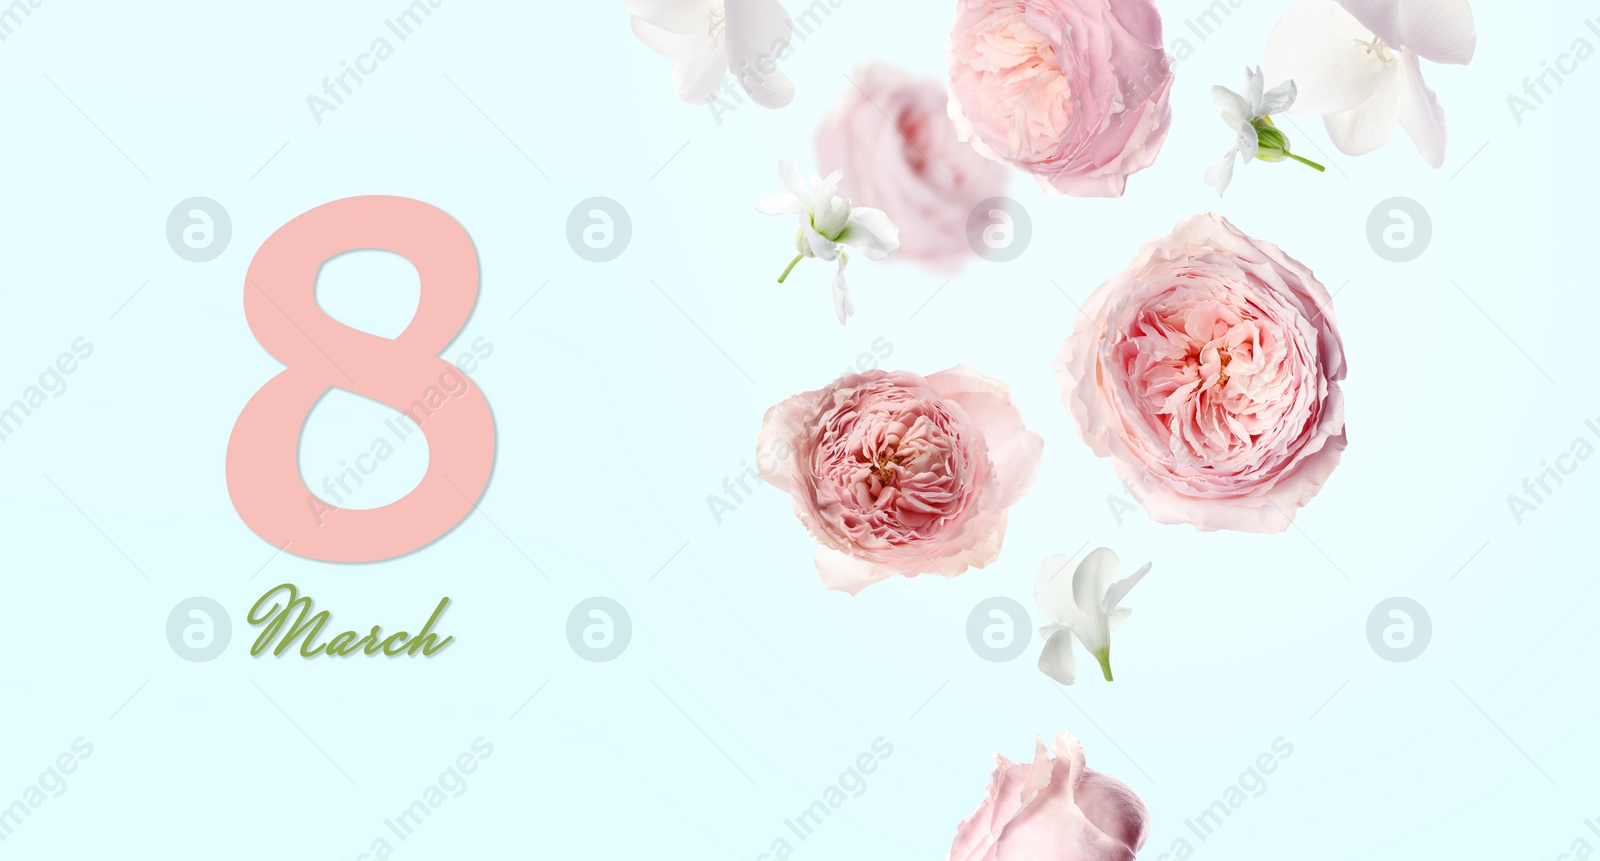 Image of March 8 - International Women's Day. Greeting card design with beautiful flowers on light blue background